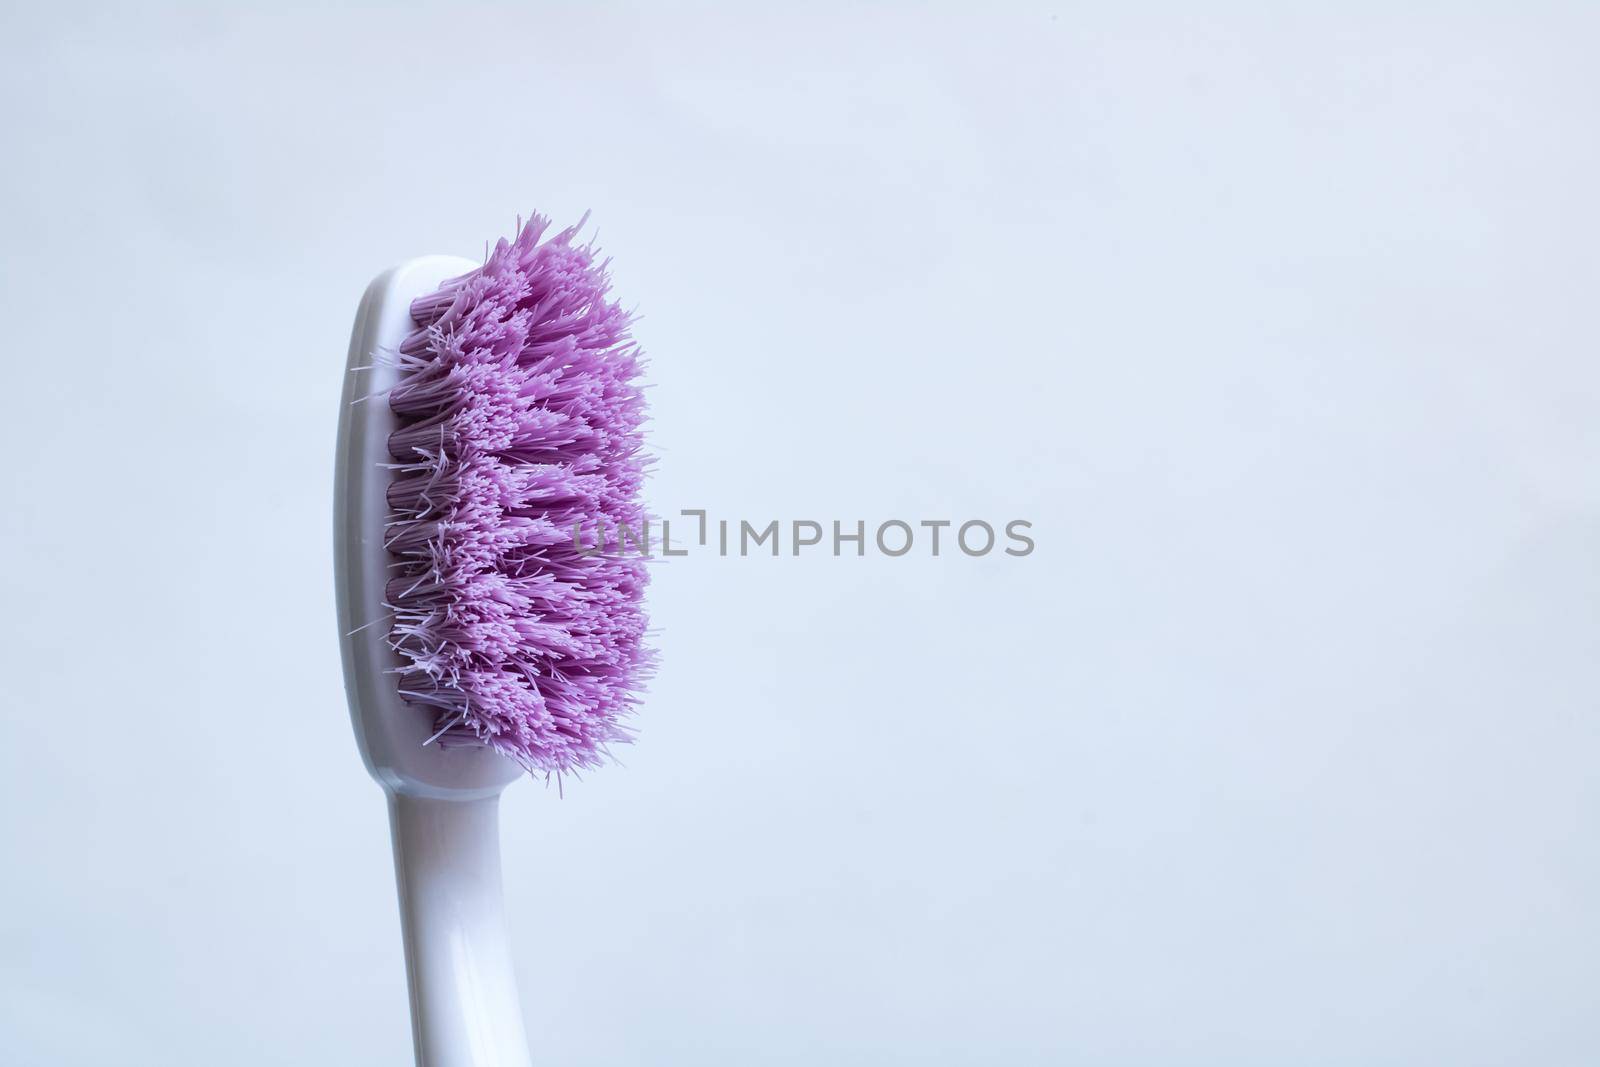 Toothbrush close up on a white background by Vera1703